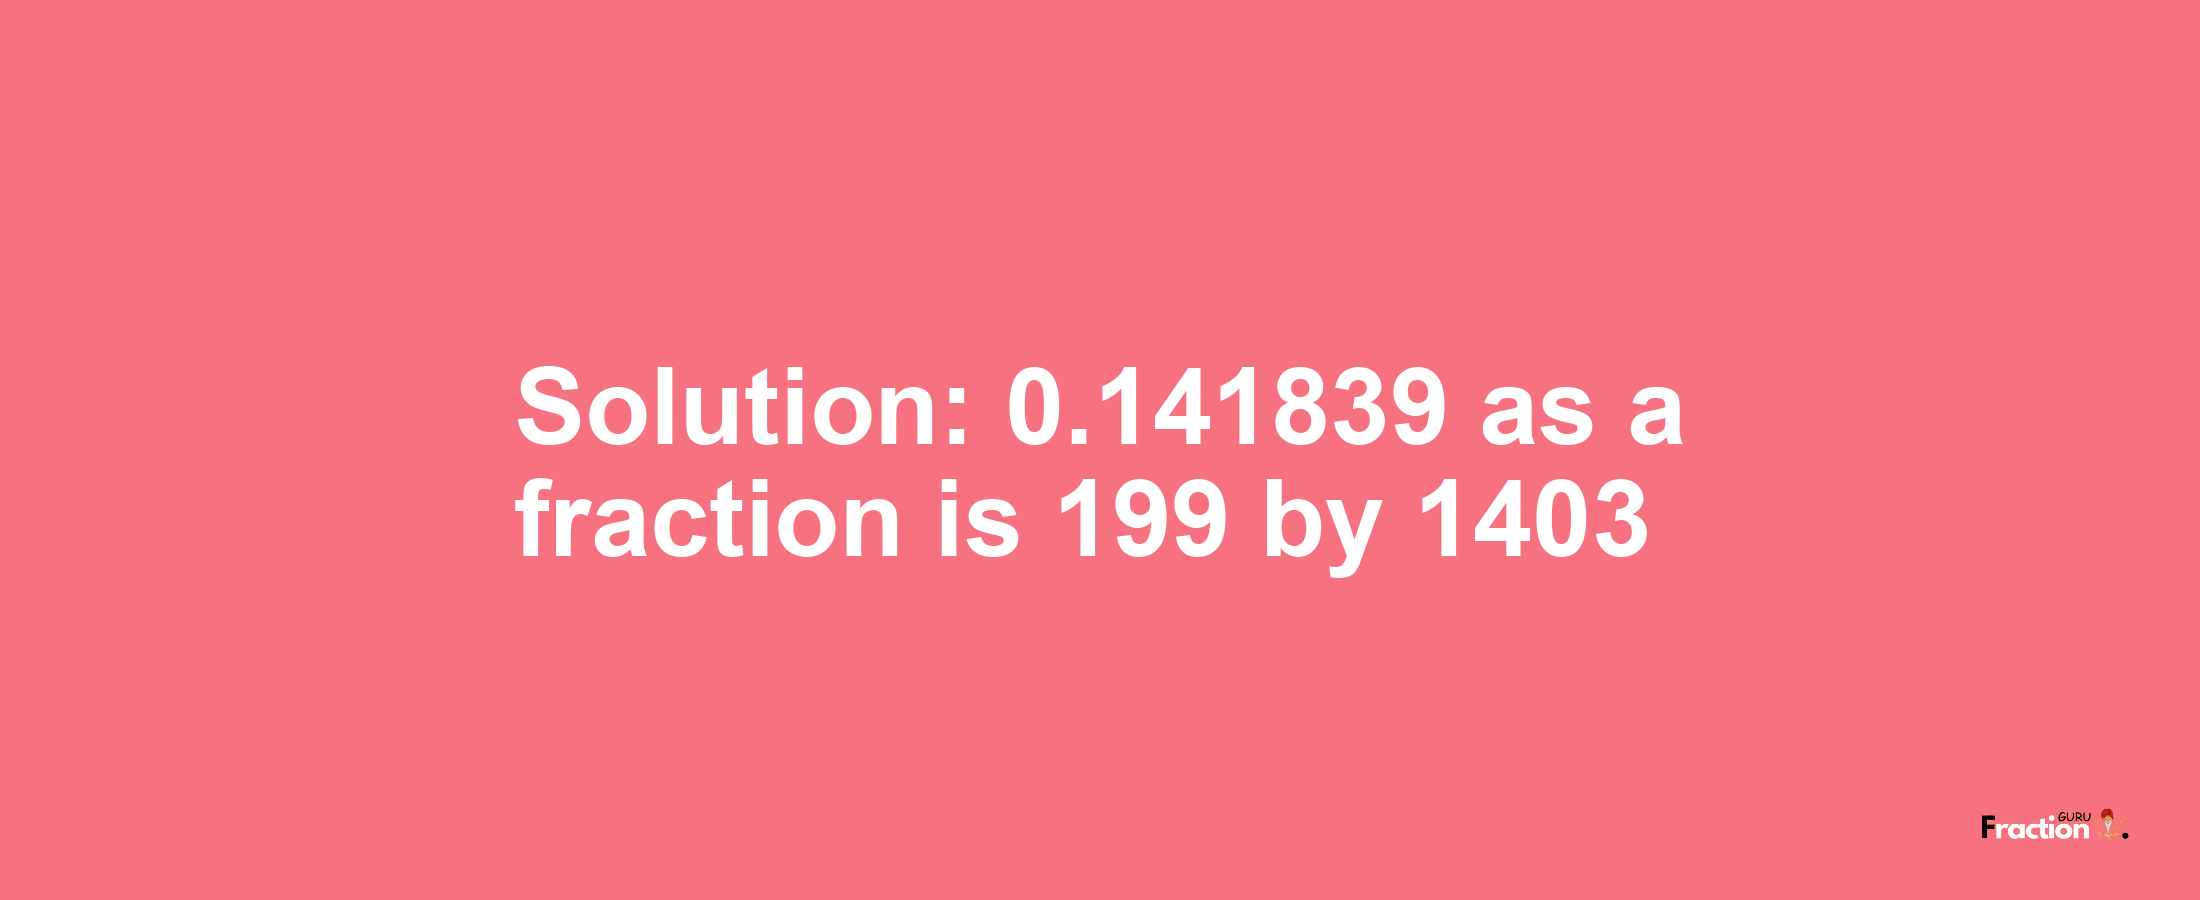 Solution:0.141839 as a fraction is 199/1403